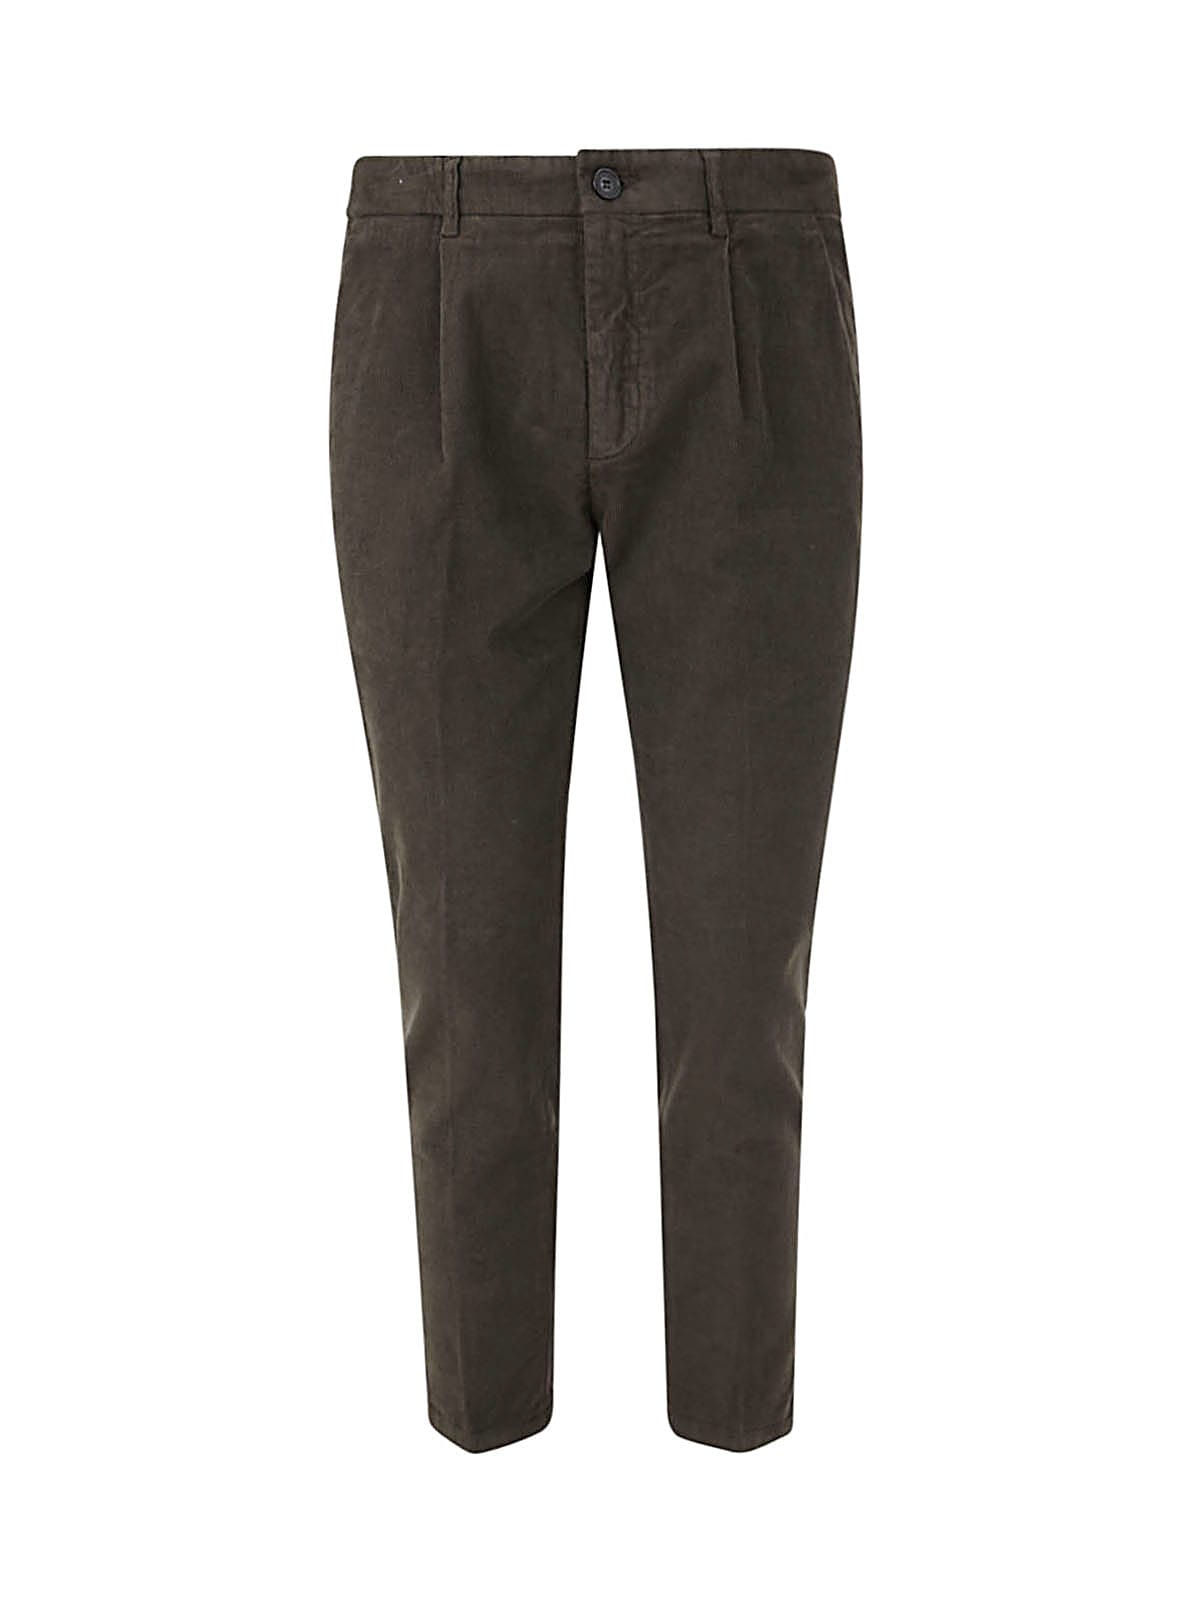 Department Five Prince Chinos Trouserswith Pences In Velvet